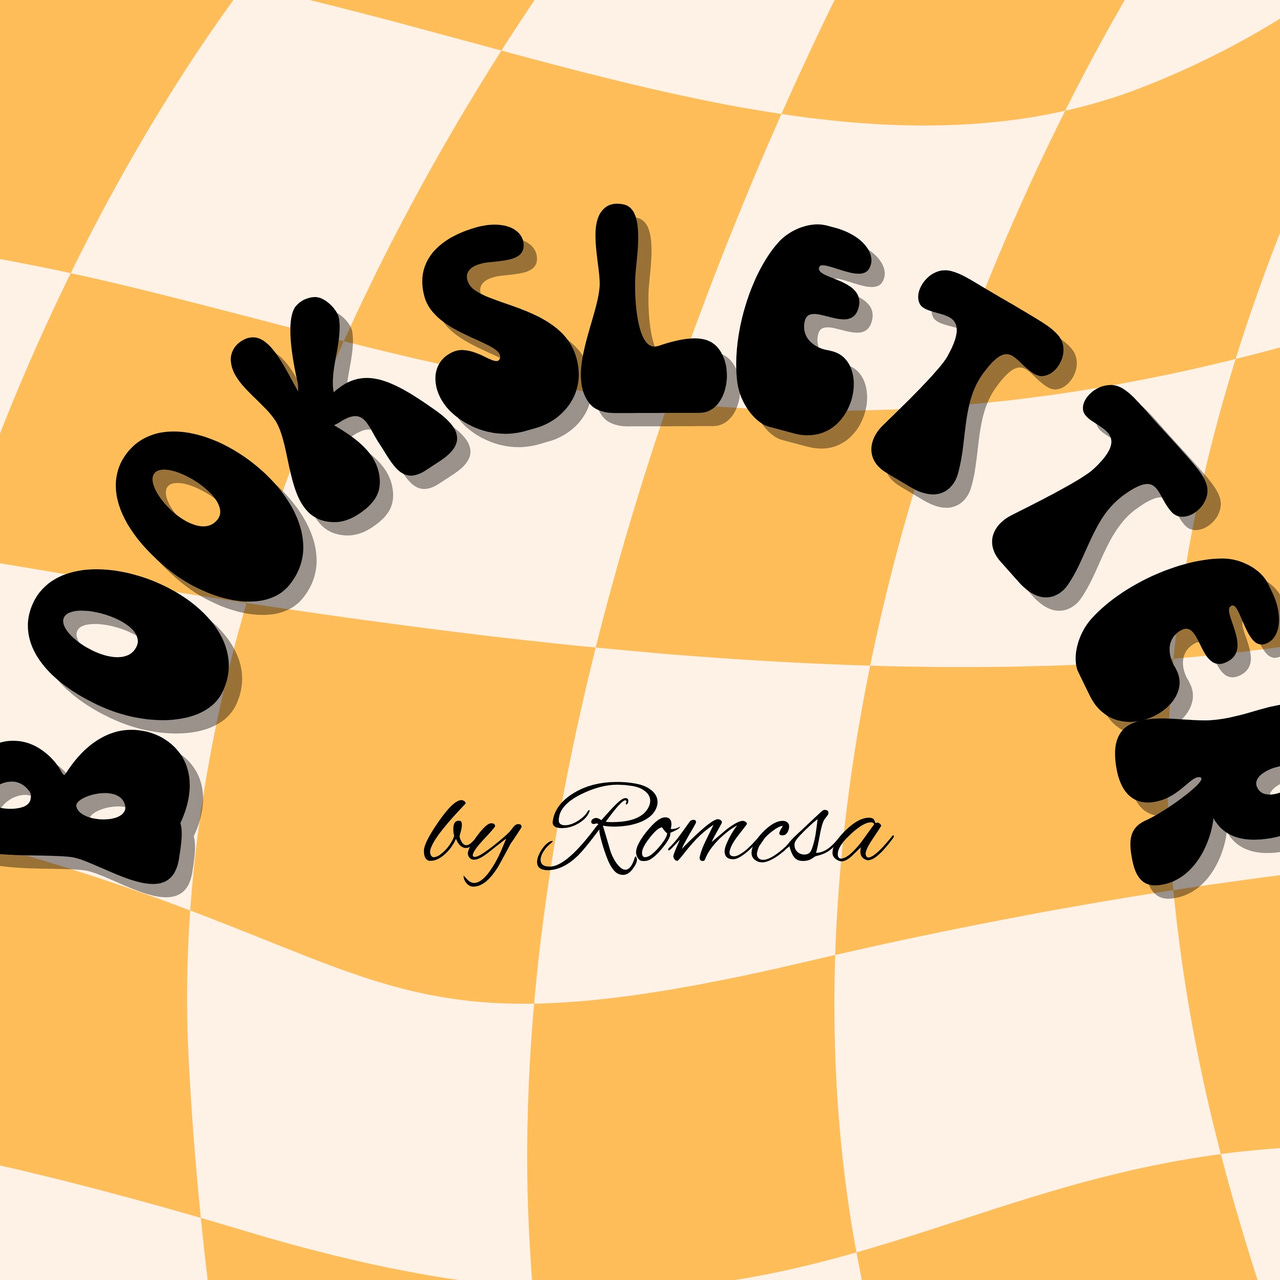 Booksletter by Romcsa